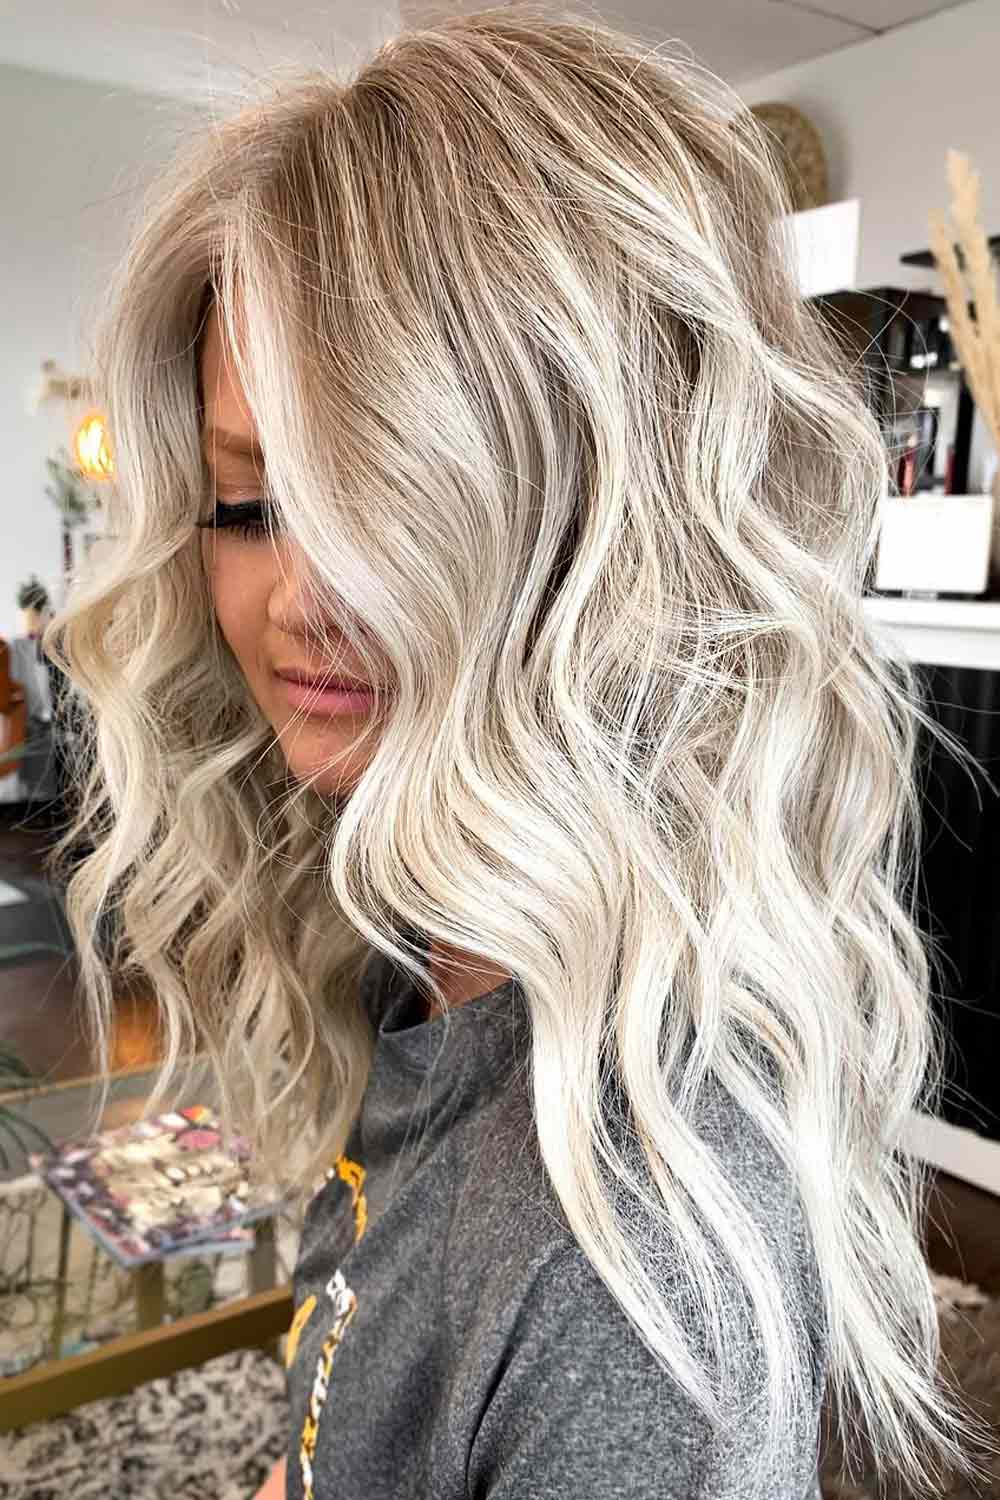 Classic Balayage Blonde #blondehair #blondehaircolor #blonde